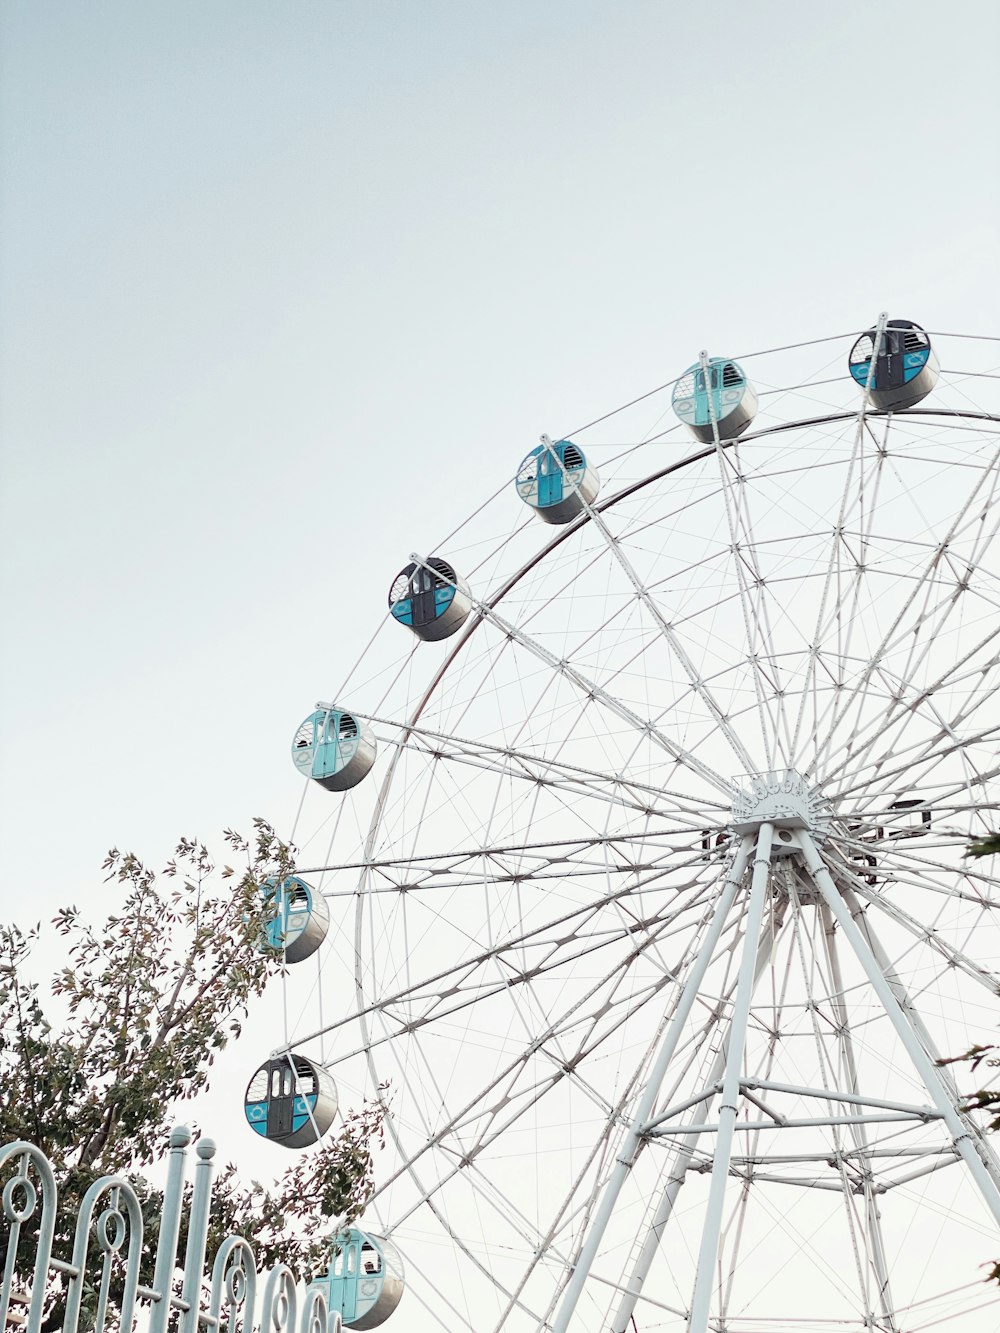 a ferris wheel with blue and white decorations